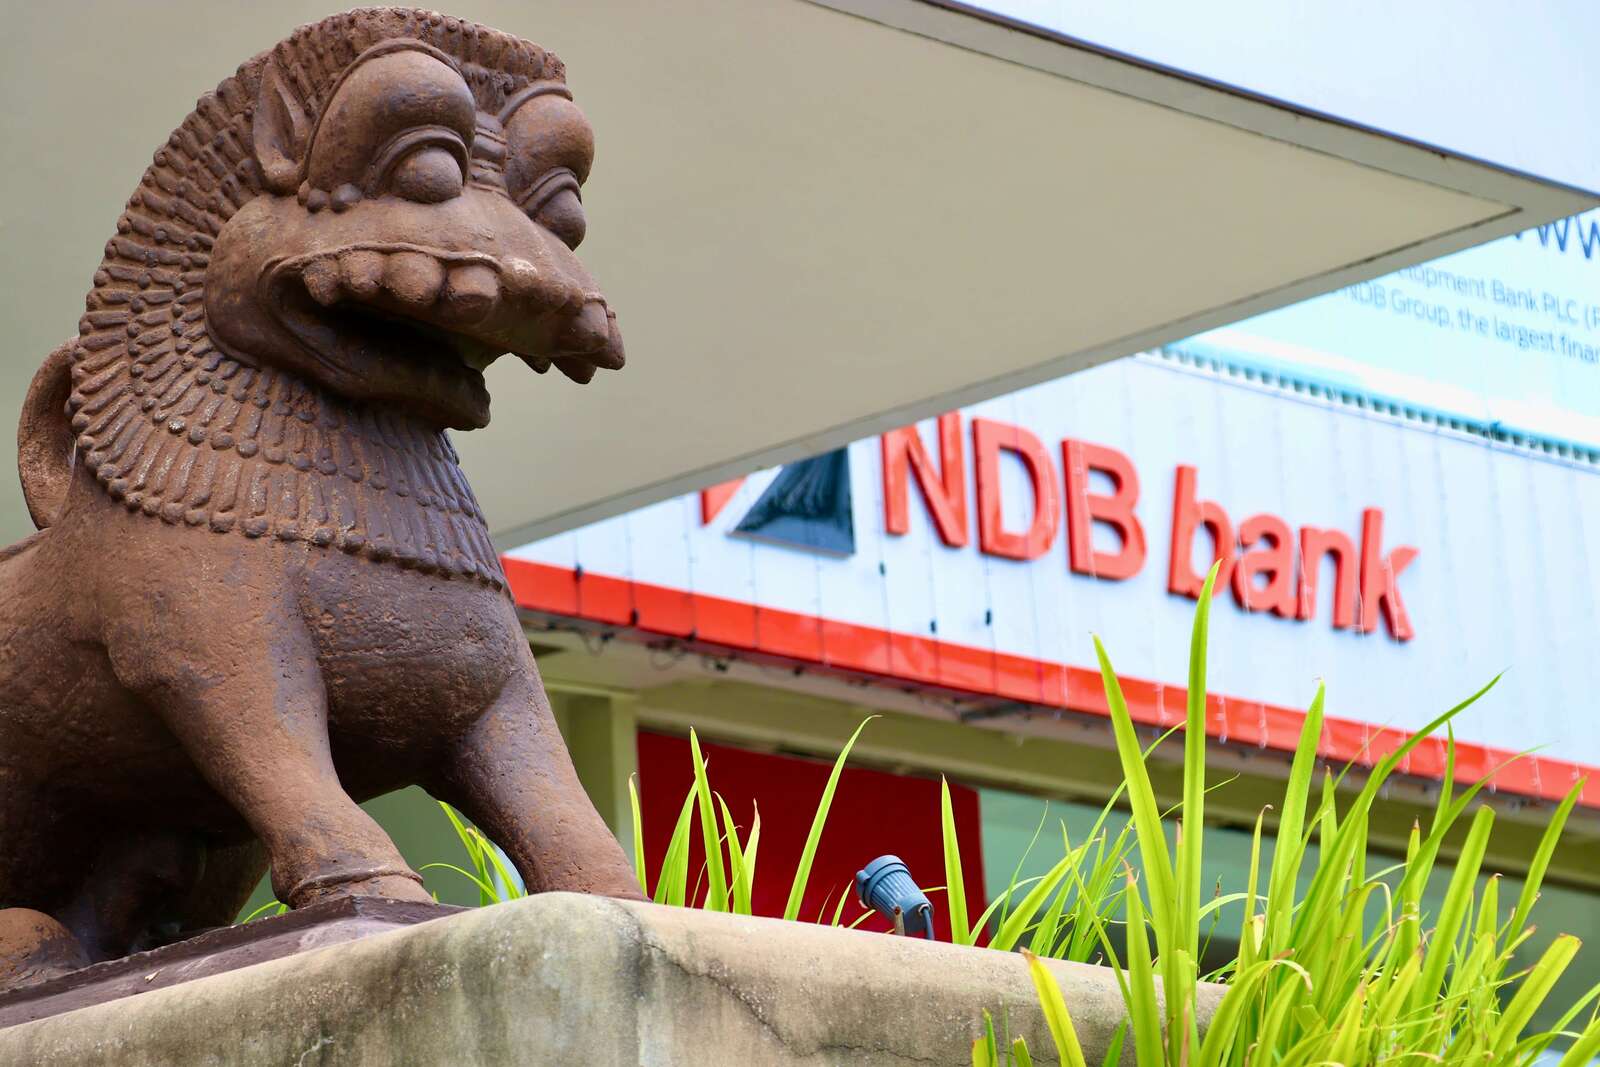 16-fascinating-facts-about-ndb-bank